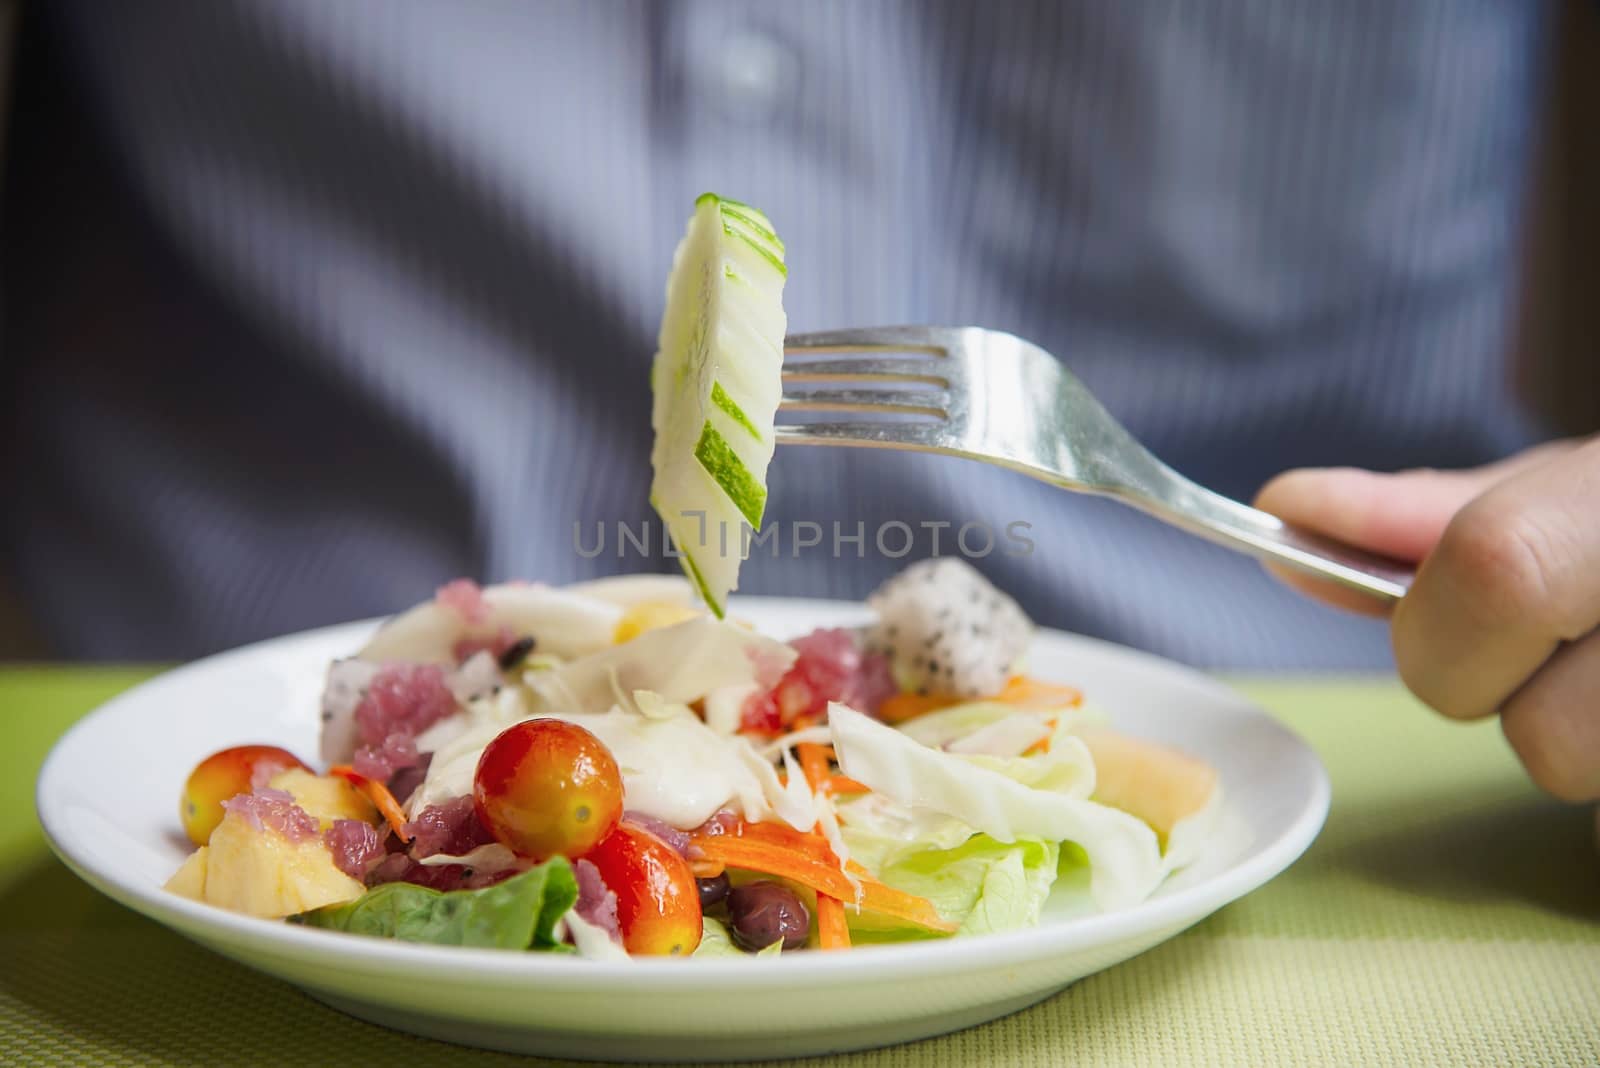 Man ready to eat vegetable salad - people with clean fresh healthy food concept